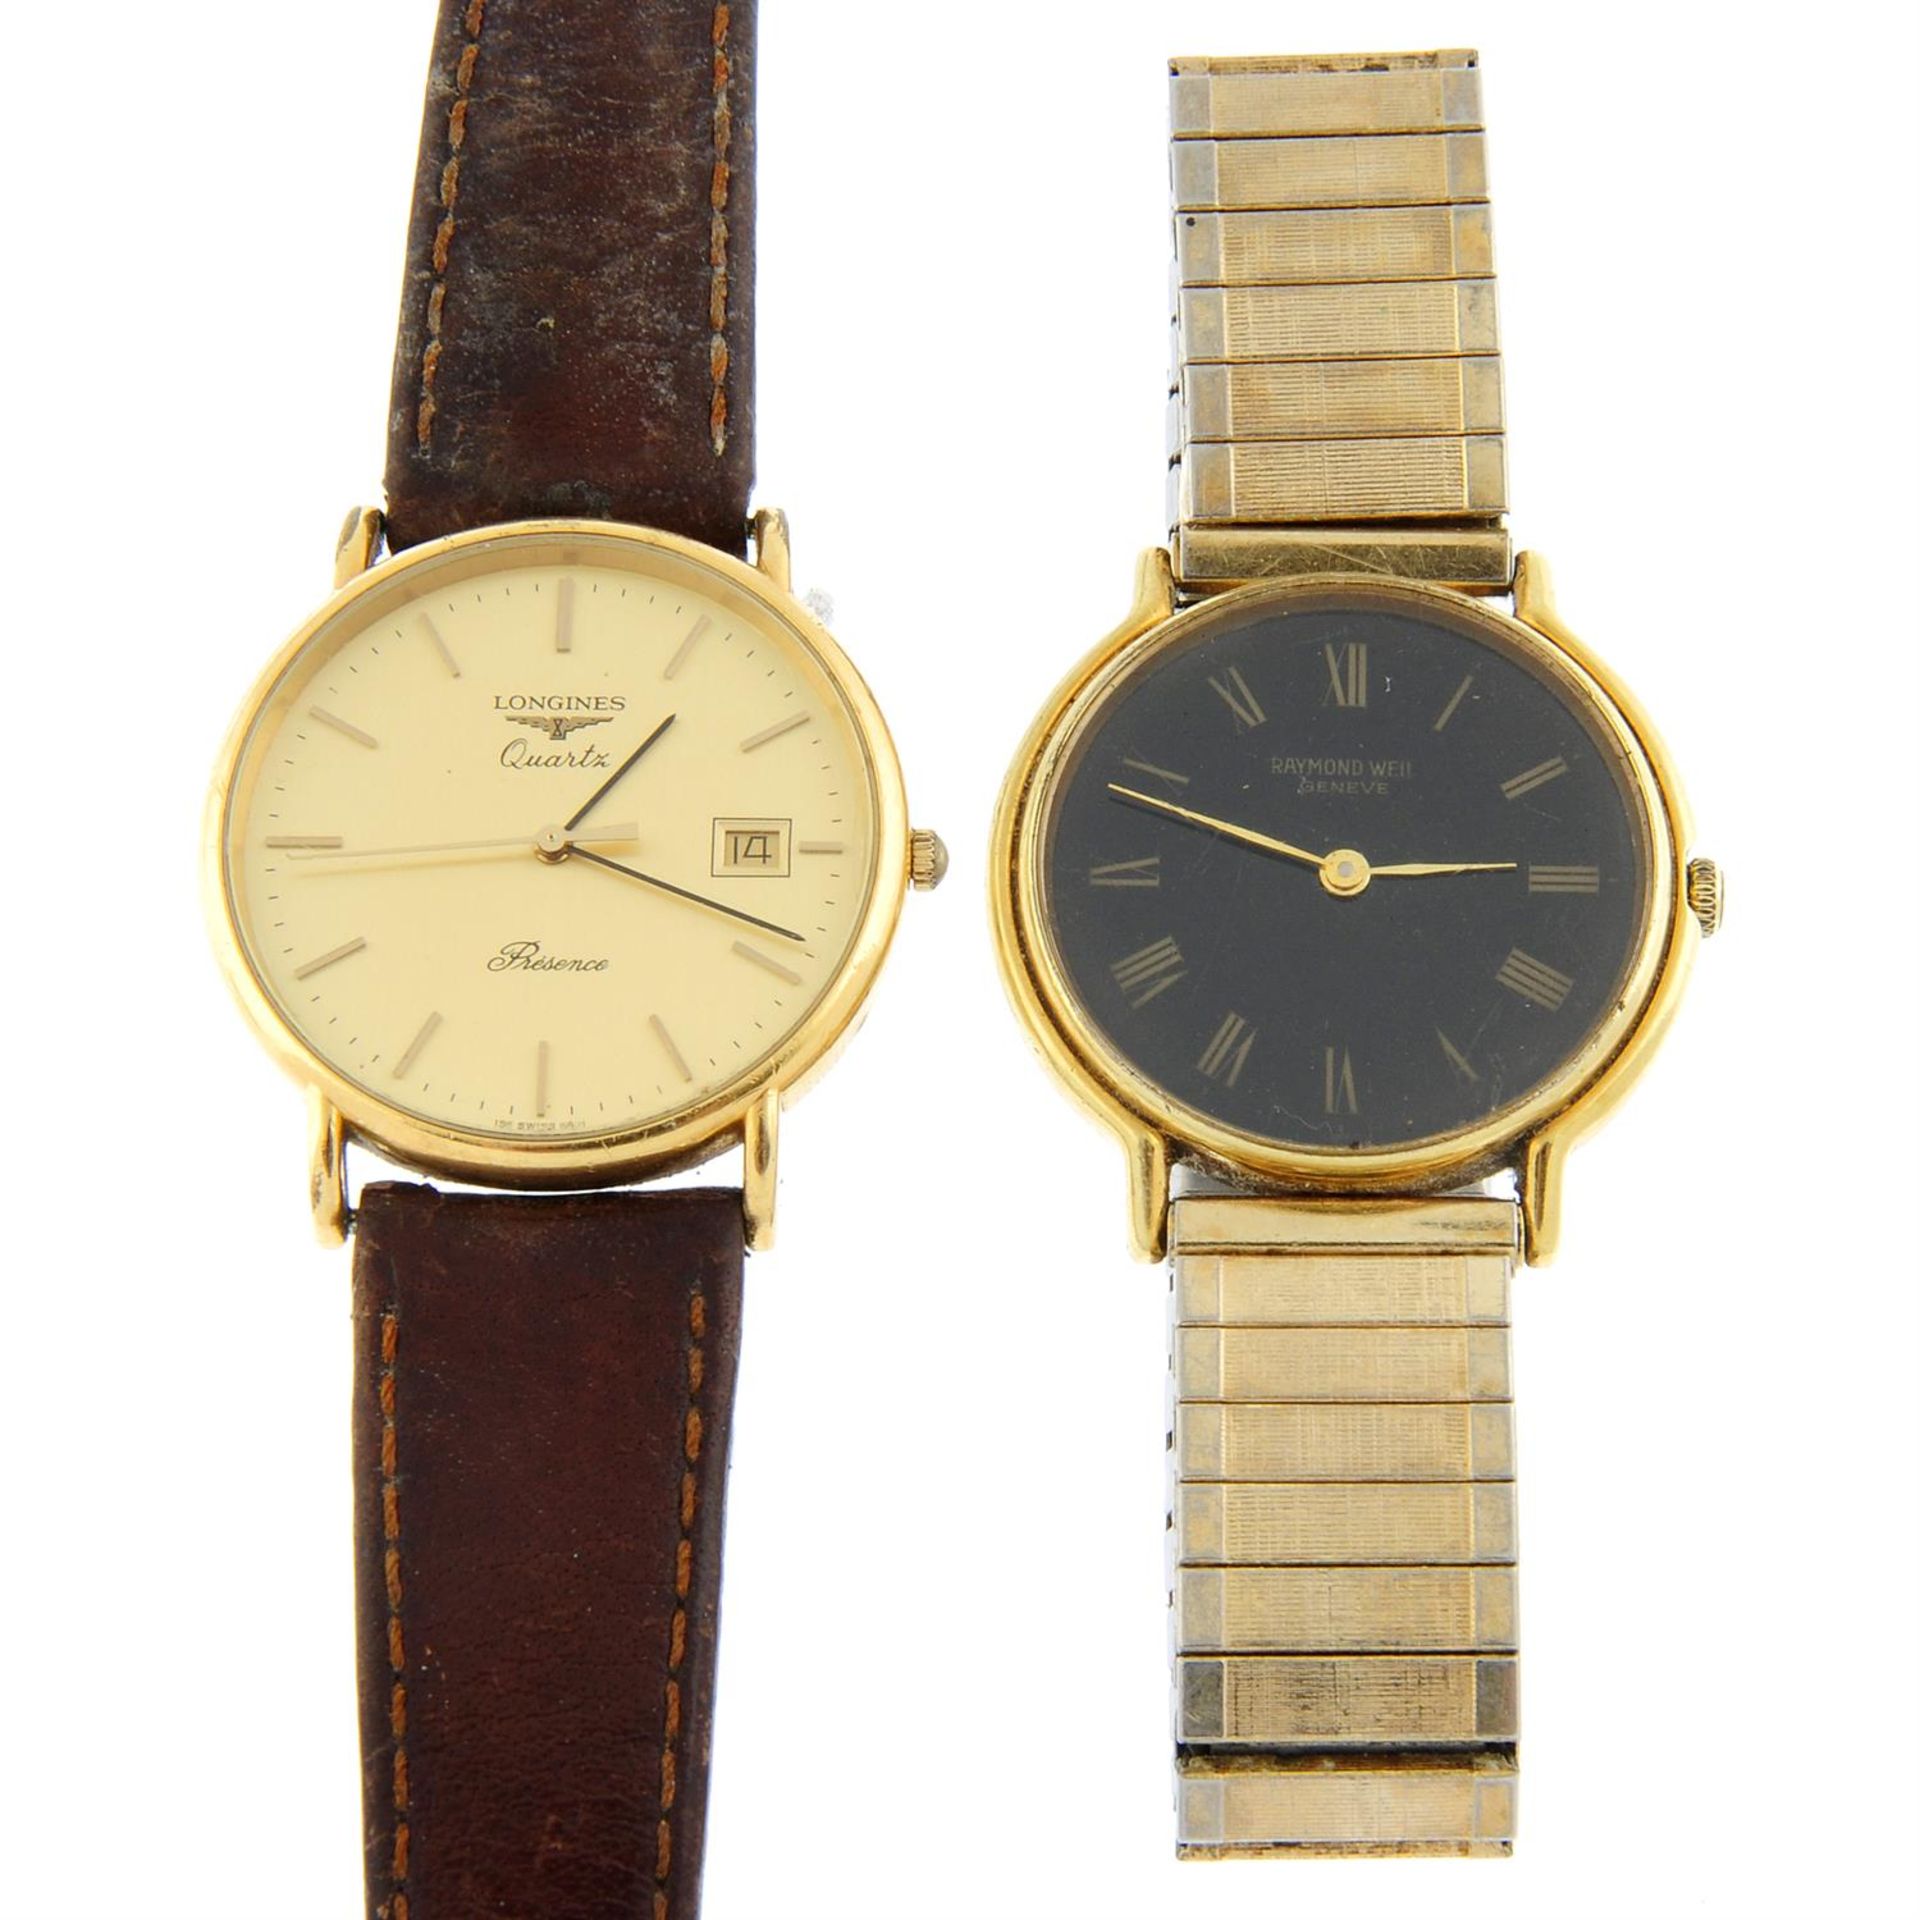 LONGINES - a gold plated Presence wrist watch (33mm) together with a Raymond Weil bracelet watch.